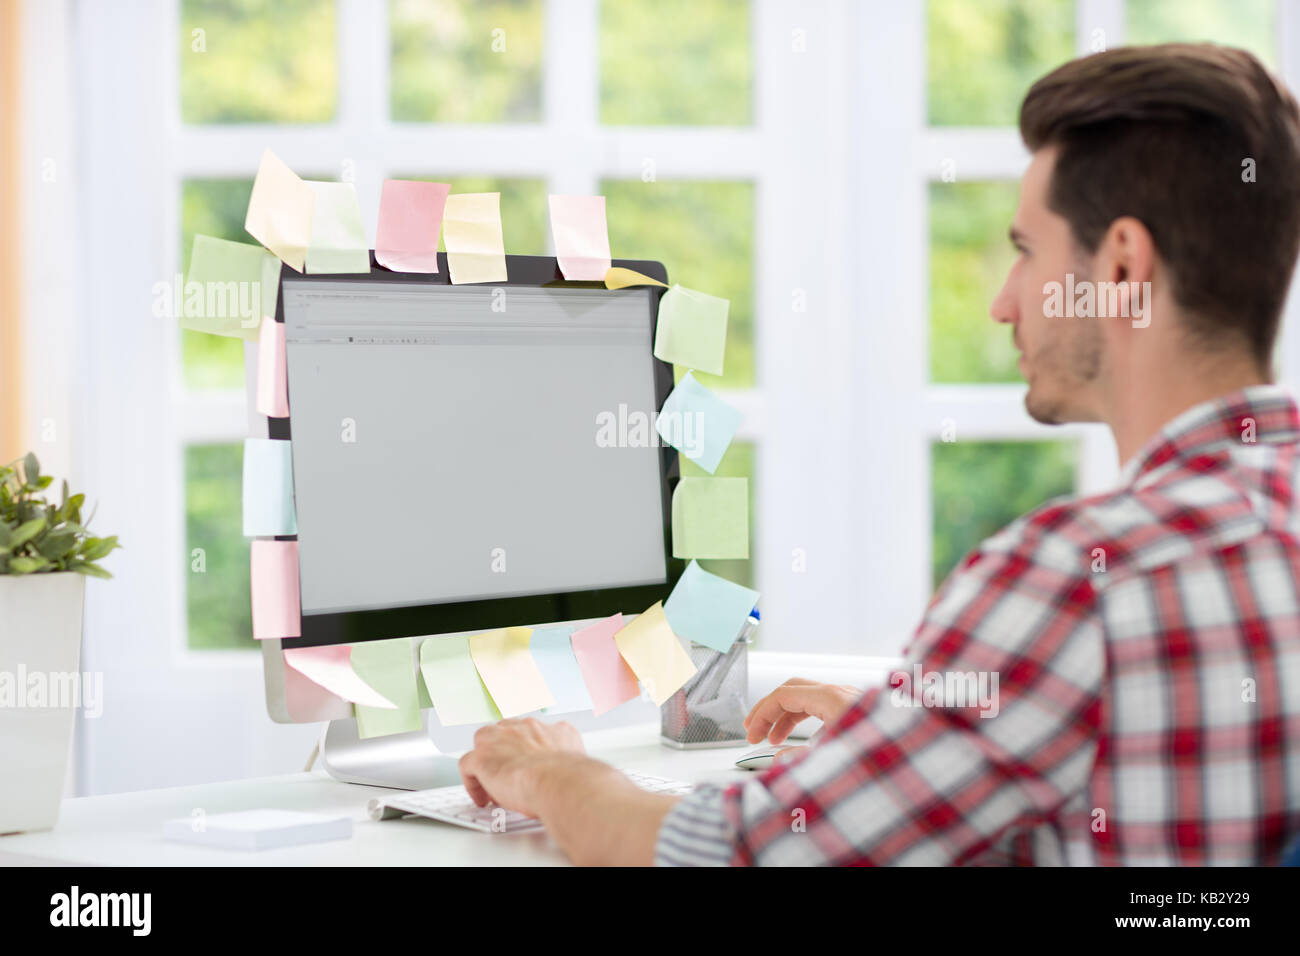 Man looking at a computer monitor with notes on it Stock Photo